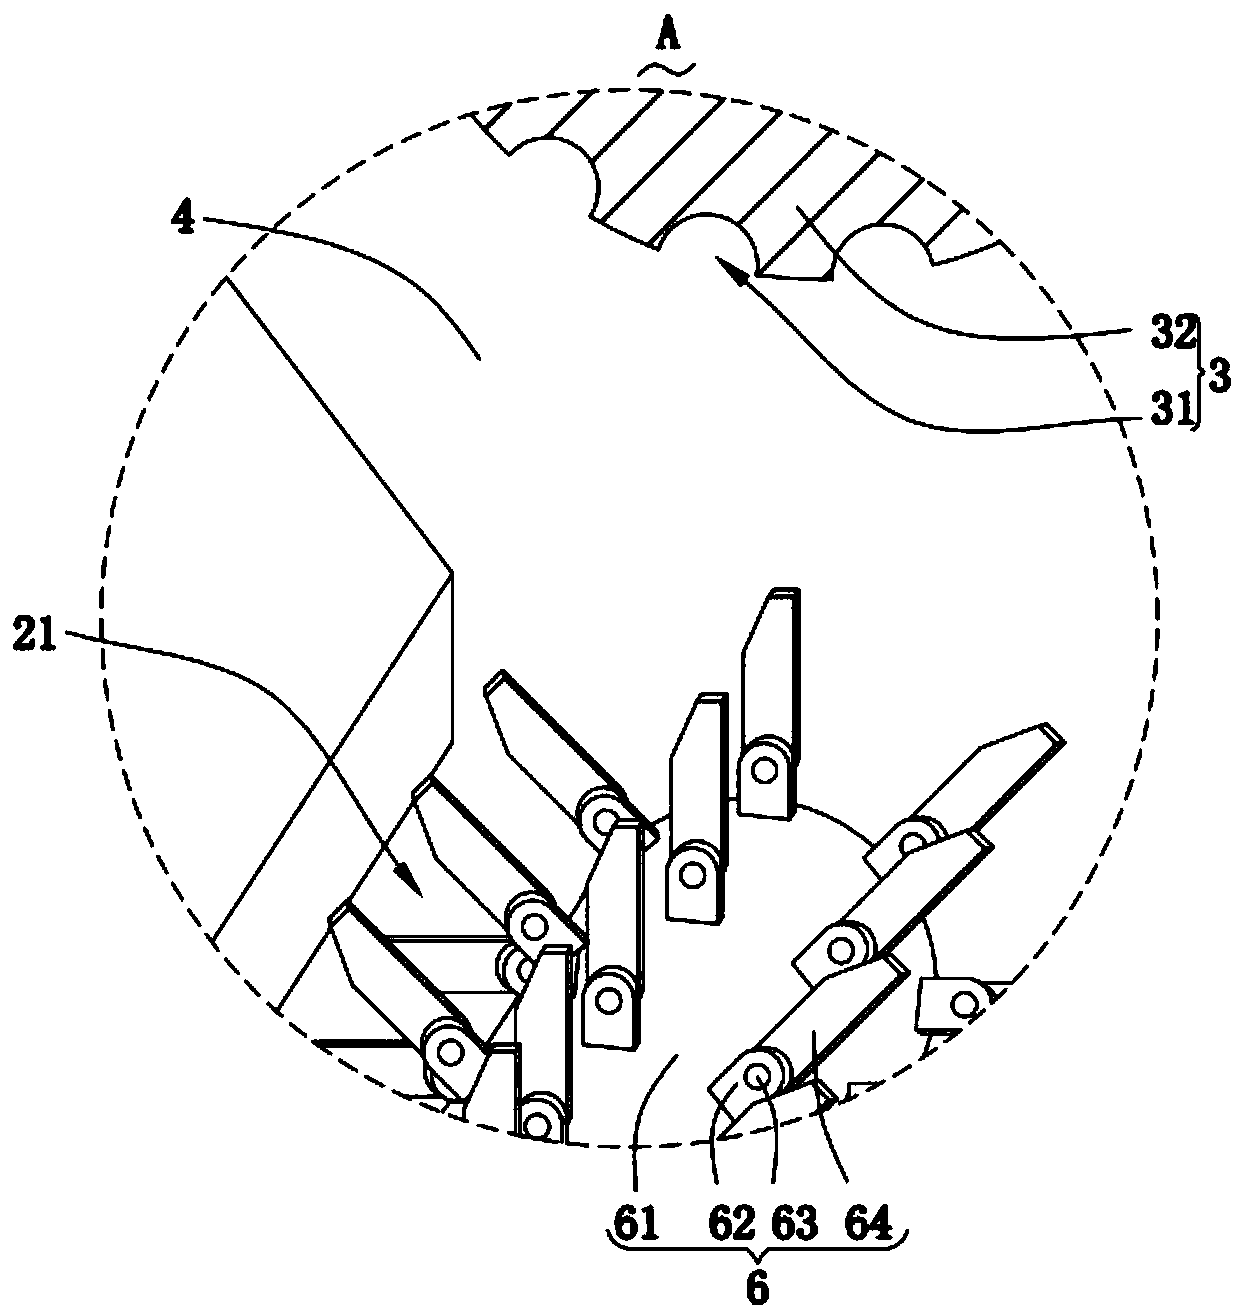 Wheat straw crushing and field returning device